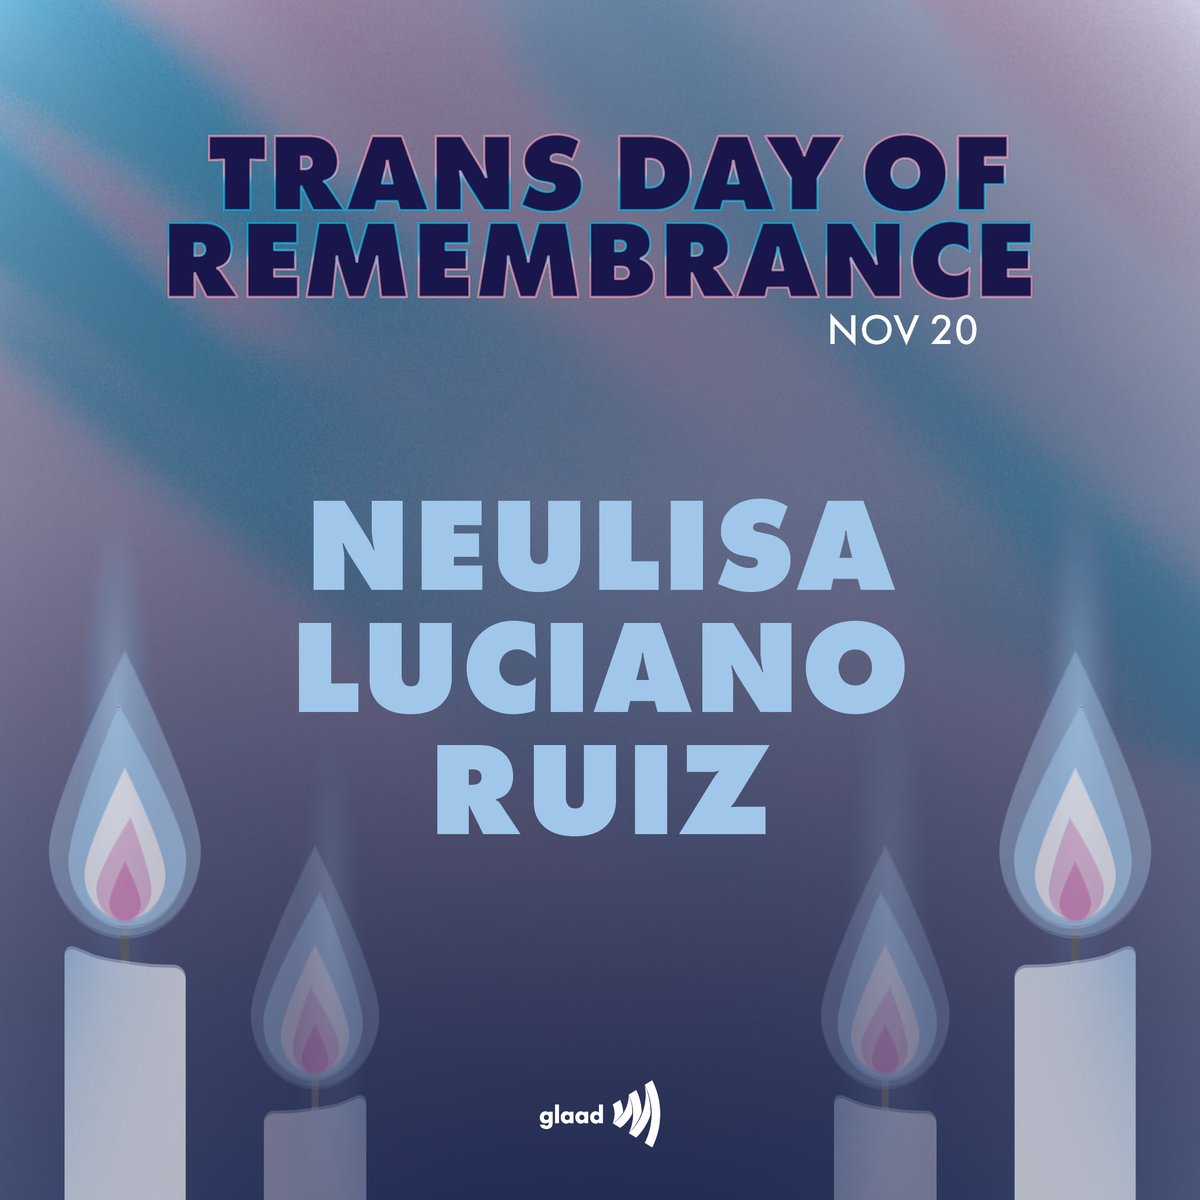 Neulisa Luciano Ruiz, a transgender woman, was killed in Toa Baja, Puerto Rico in February 2020. Her community remembers her as humble and noble.